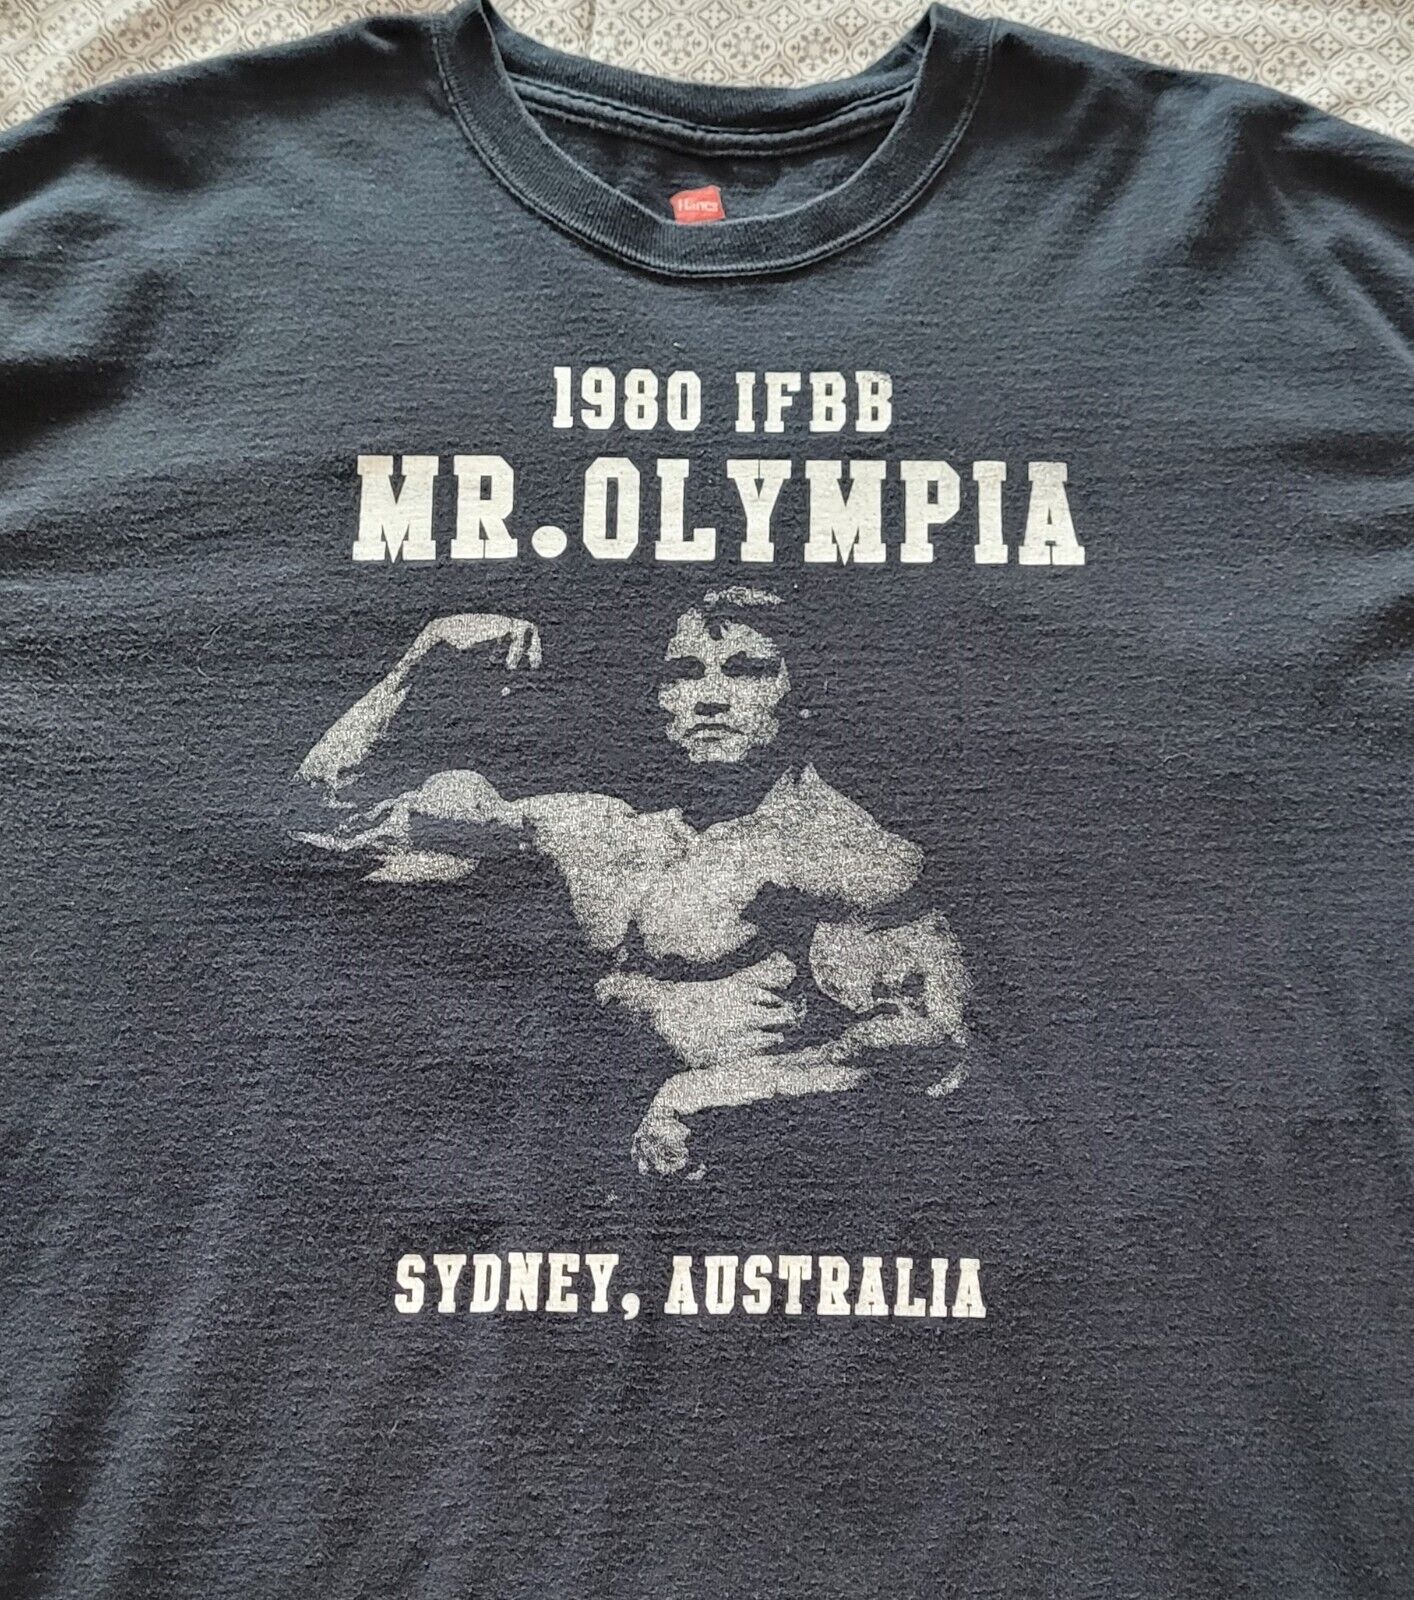 1980 IFBB Mr. Olympia Arnold Schwarzenegger Adult Large T-Shirt approx.22" X 29"